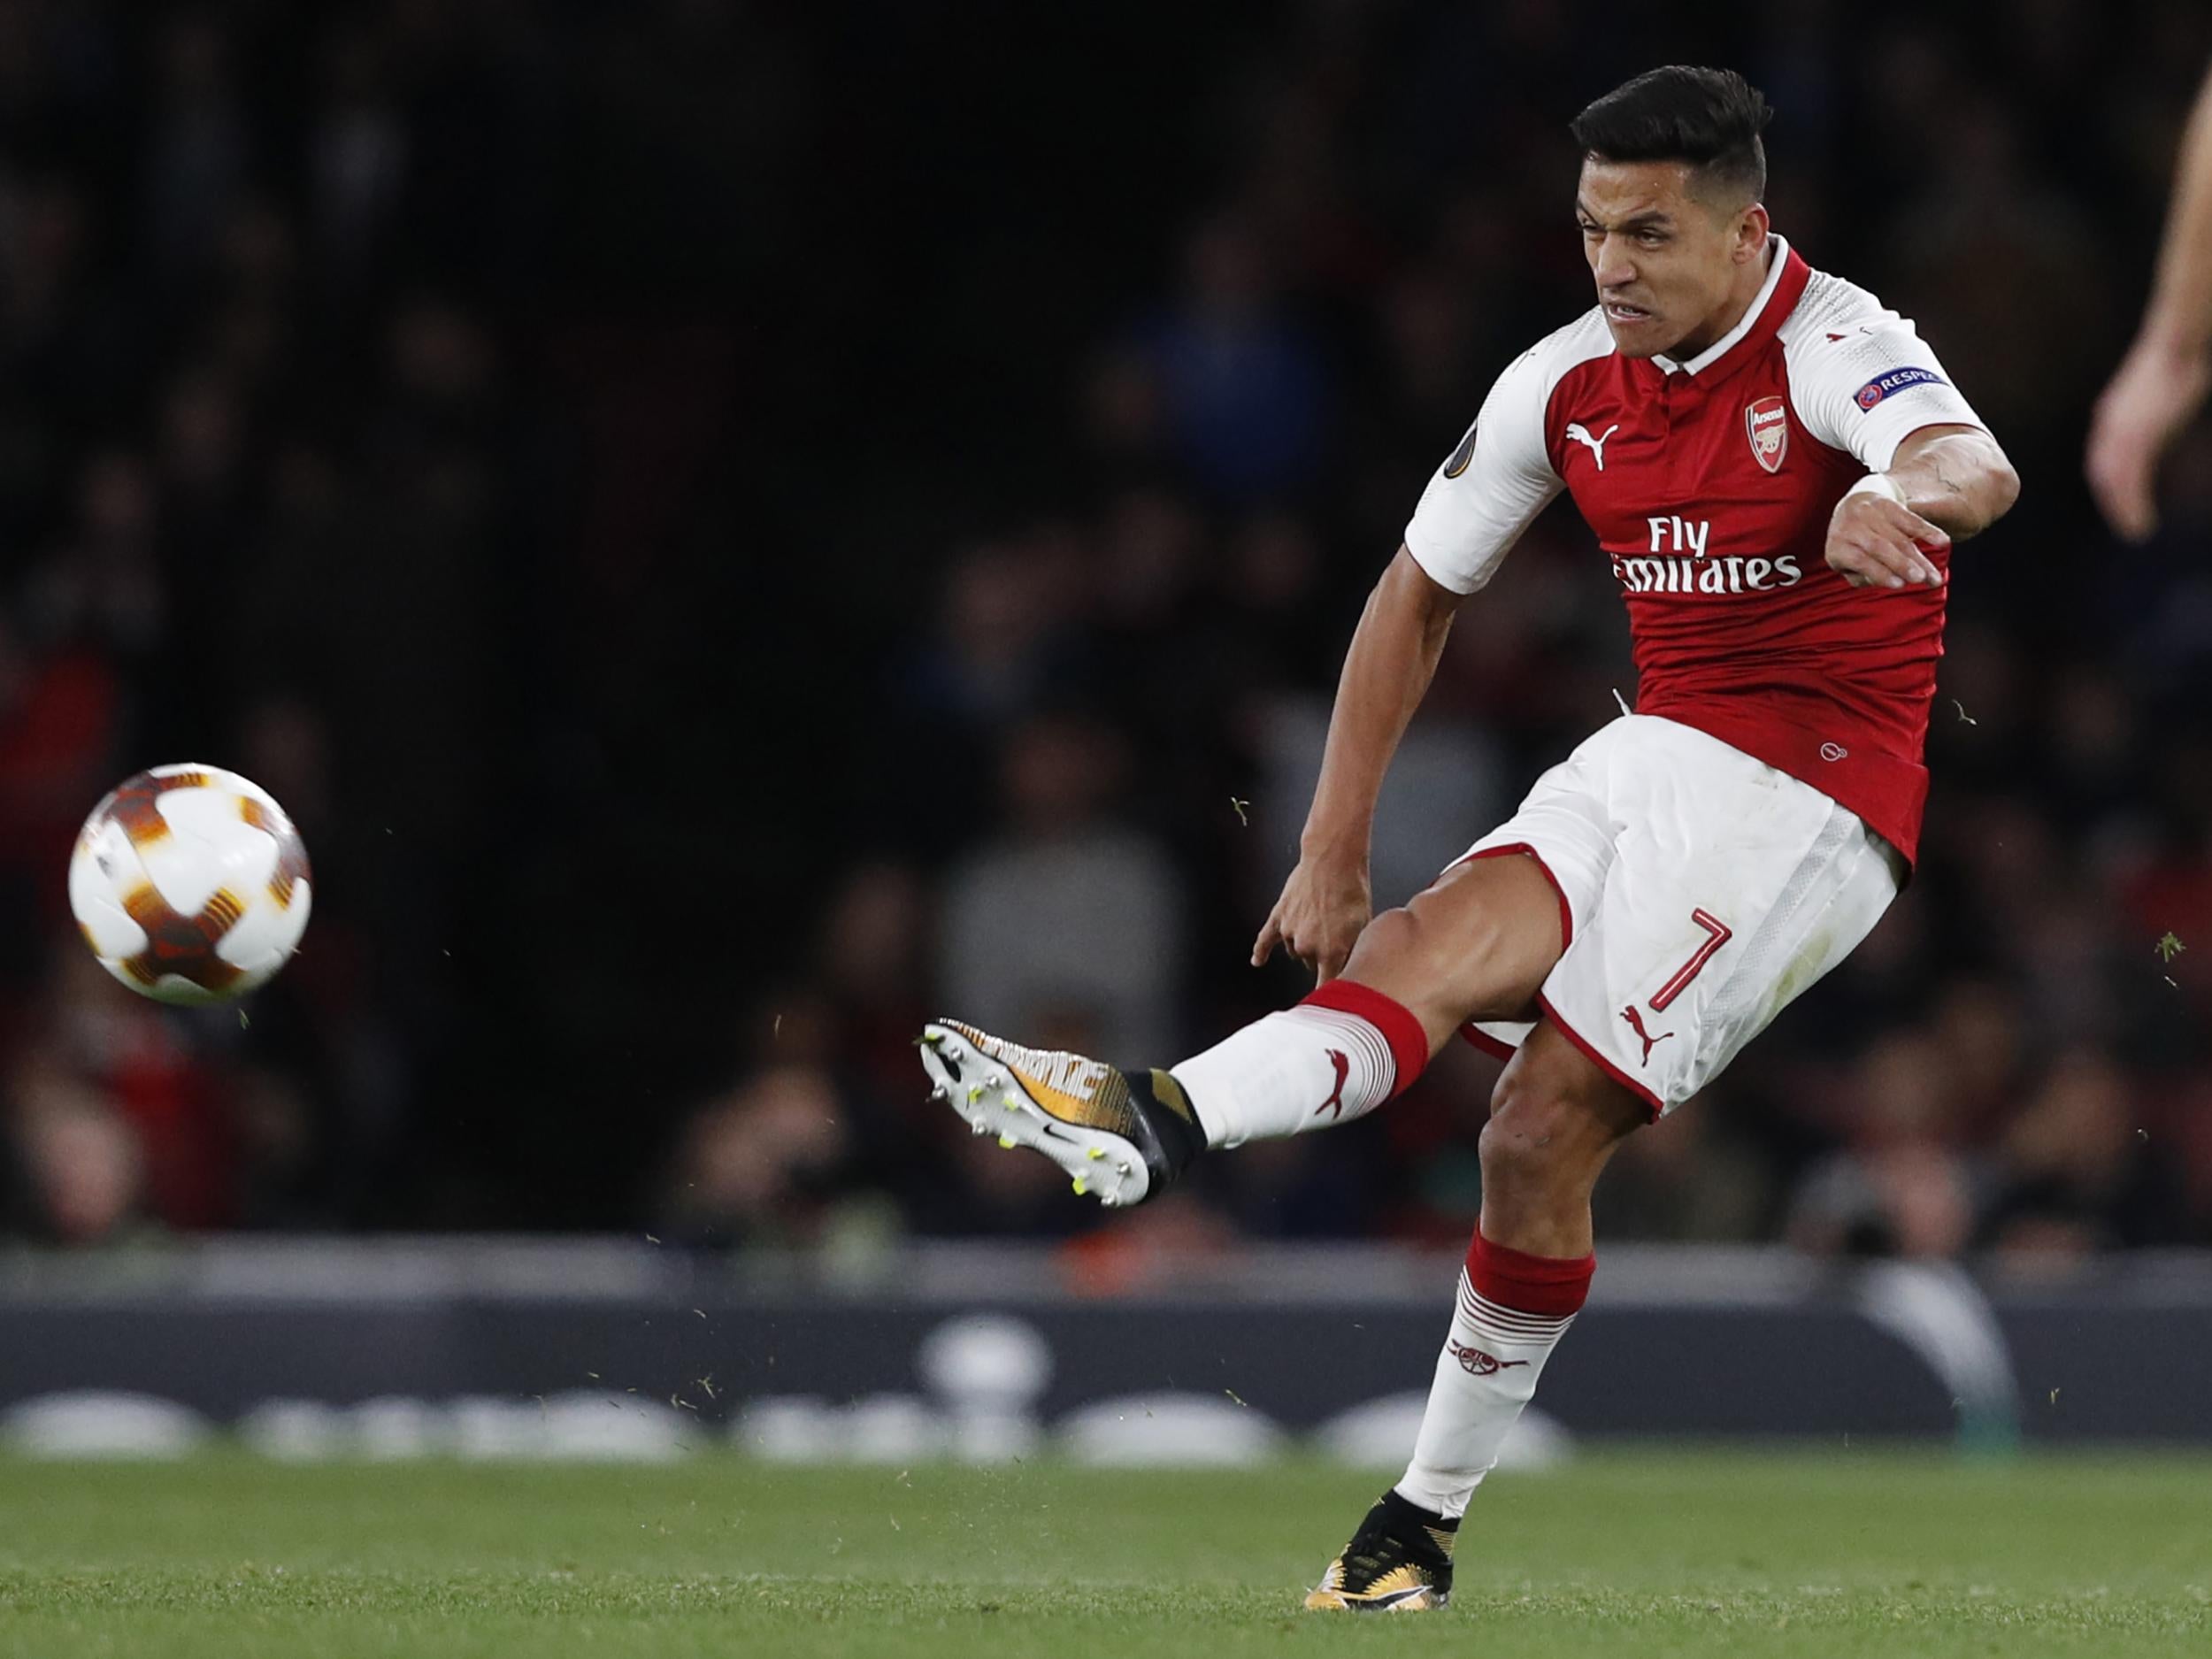 Alexis Sanchez puts Arsenal ahead with a delightful, curled strike from the edge of the box